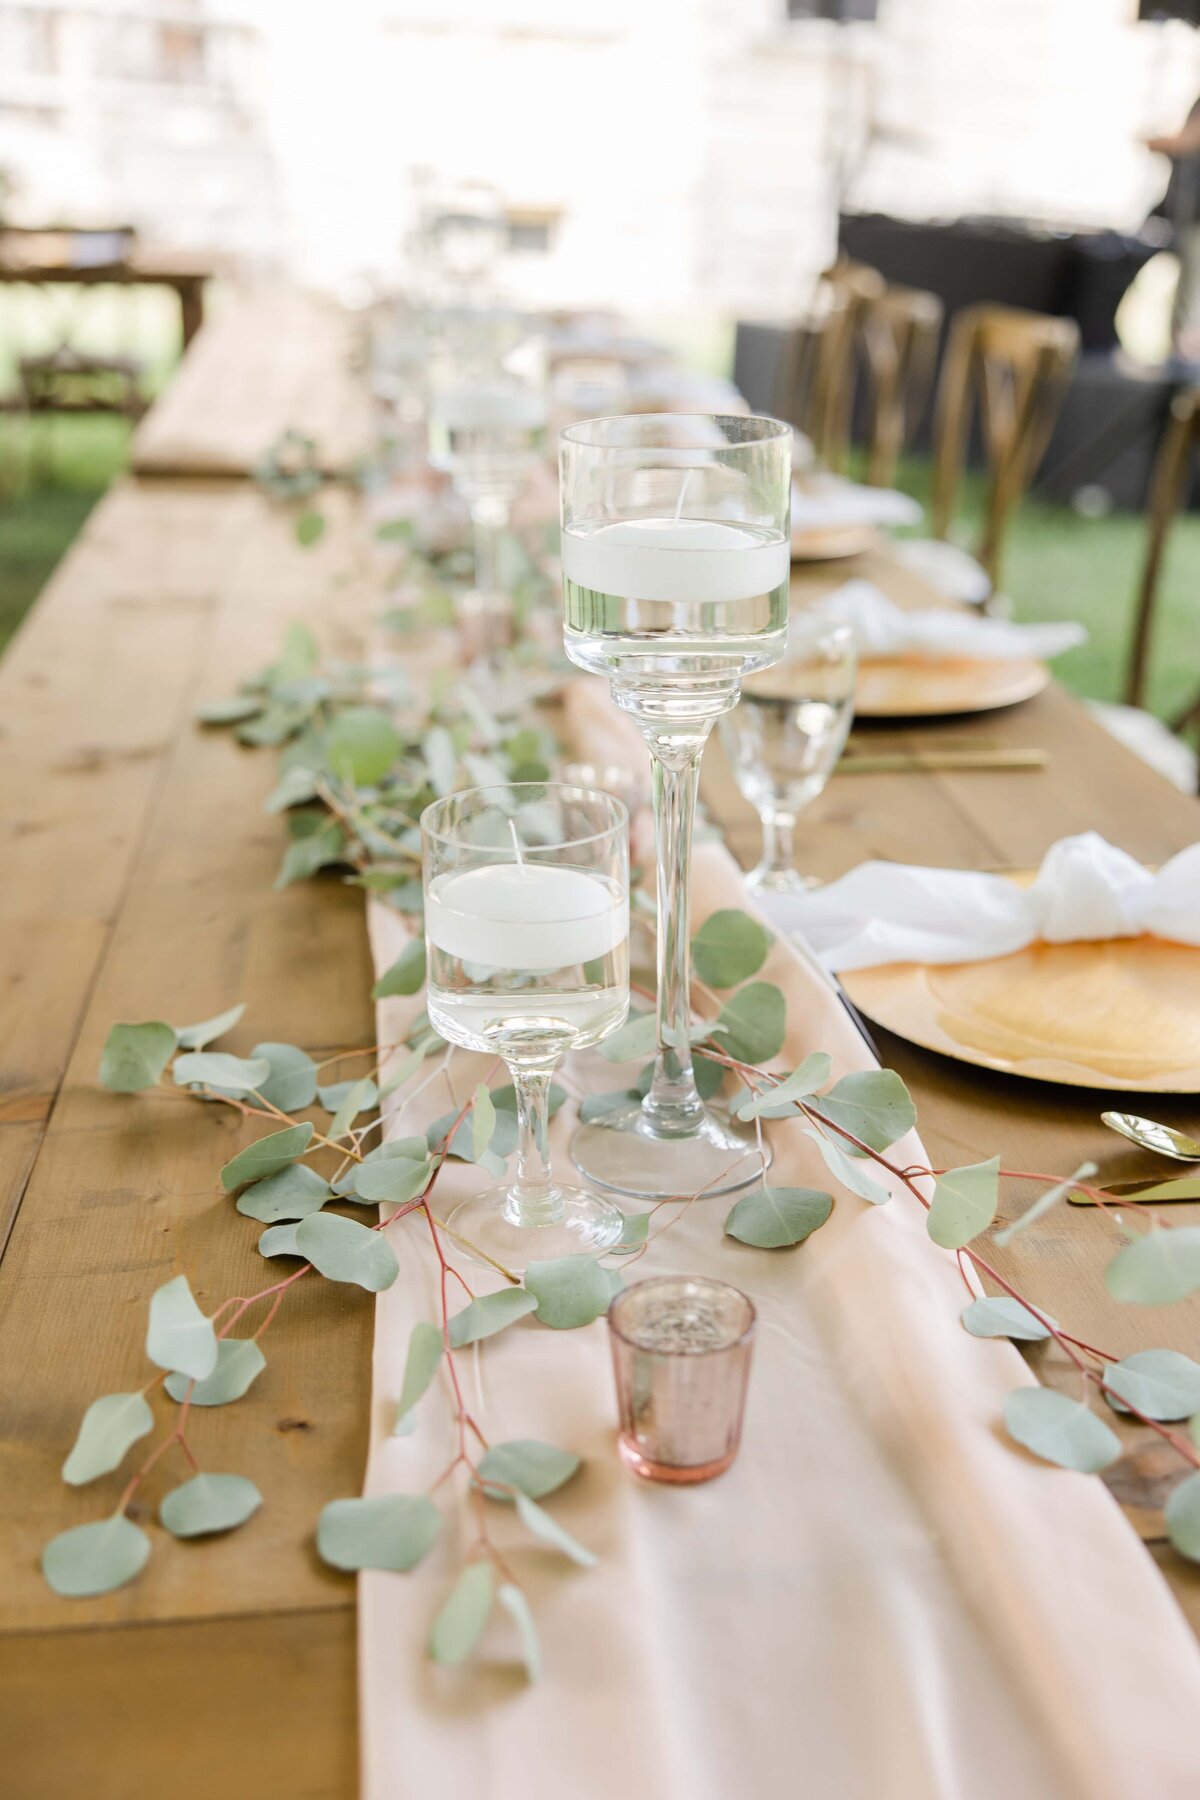 Elegant outdoor dining table setting with a floral centerpiece, water glasses, and gold chairs for park farm winery weddings.